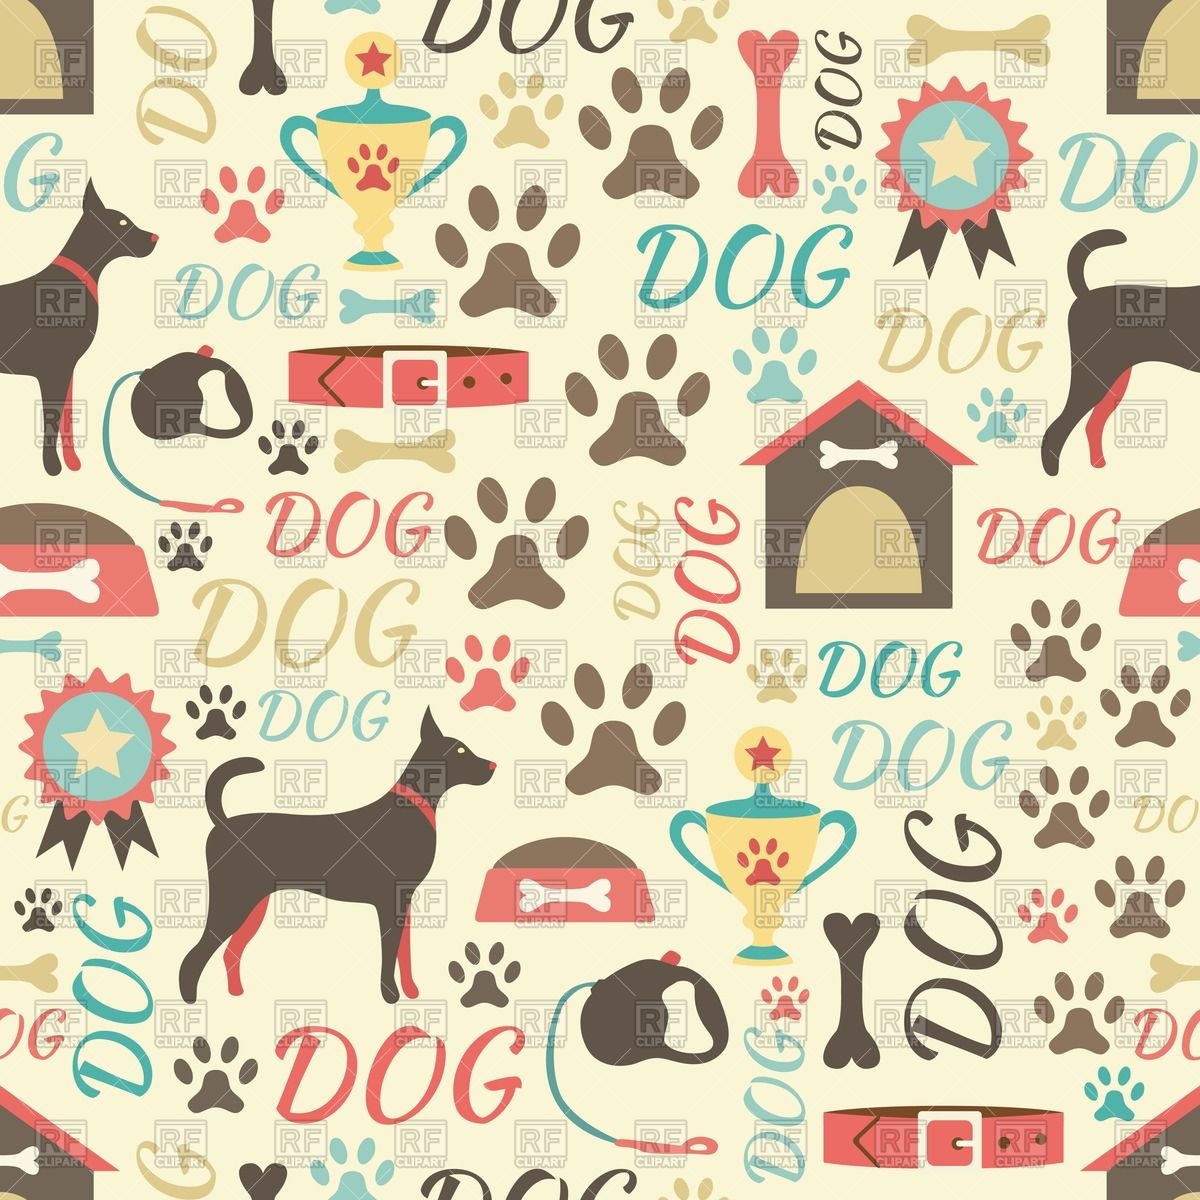 Retro Style Background With Dog Doghouse Collars Paw Prints